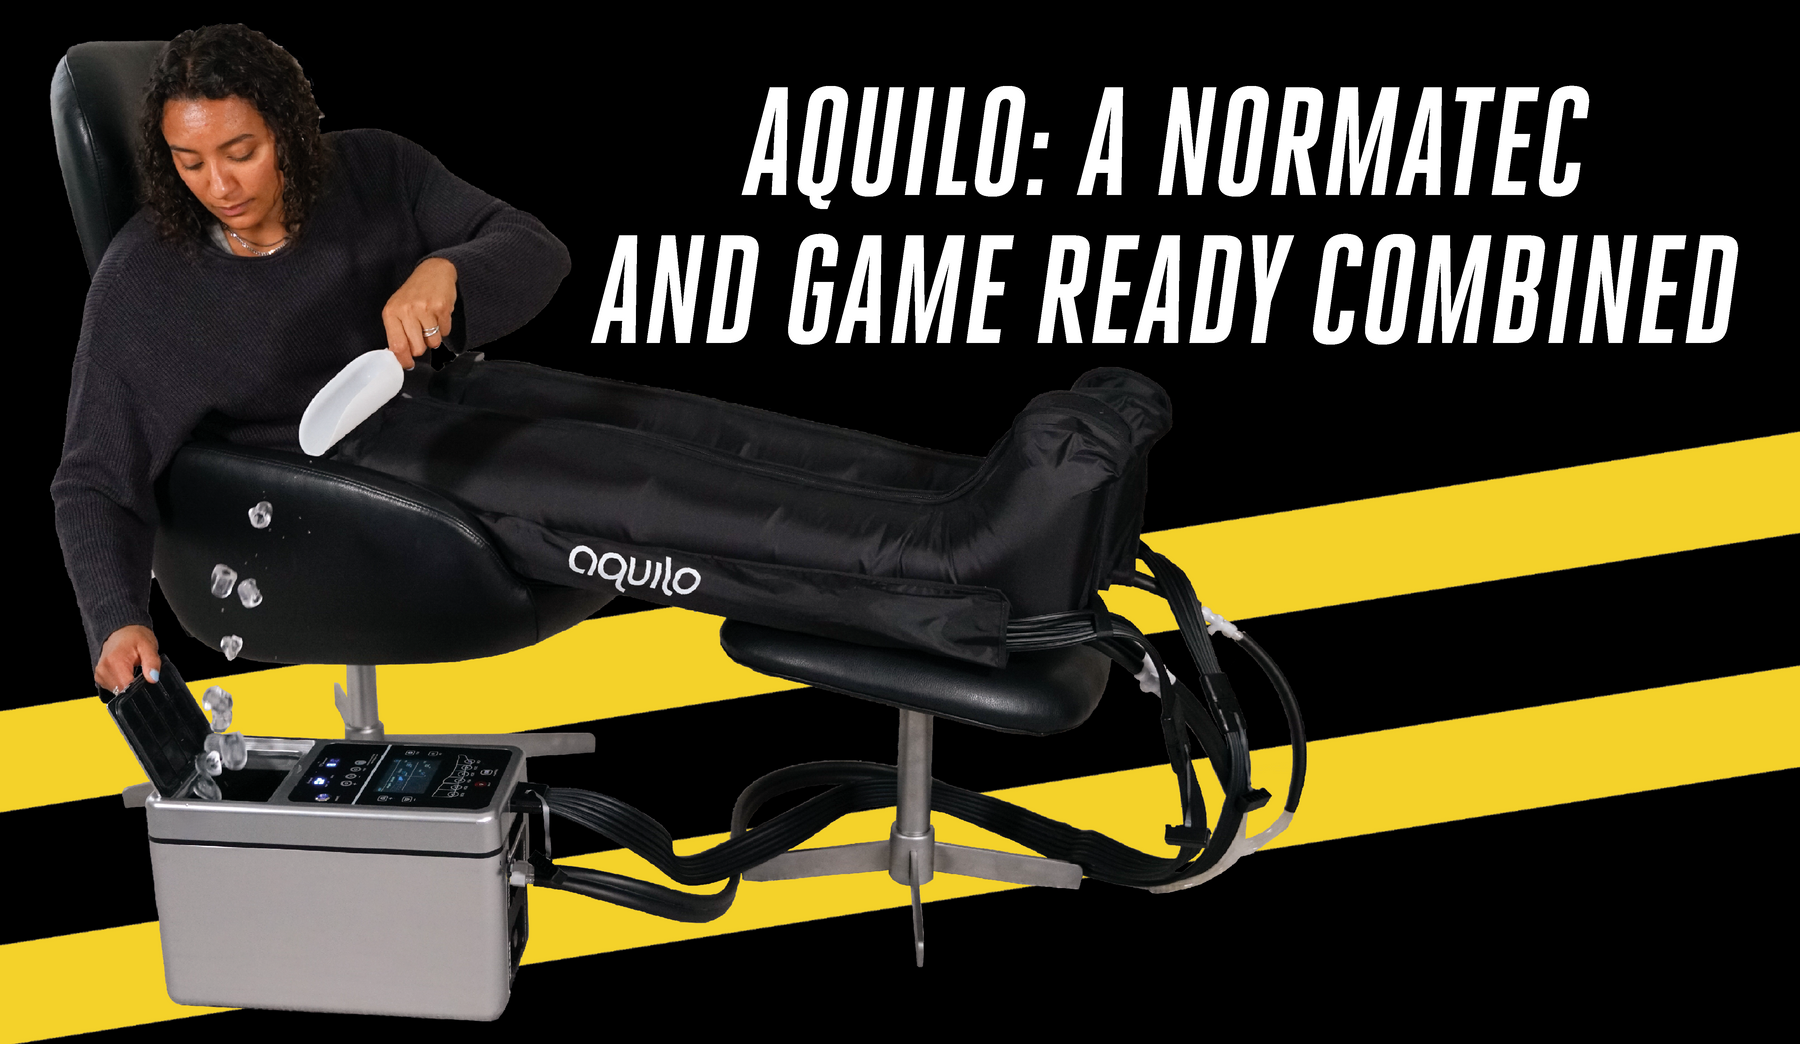 Aquilo: a Normatec and Game Ready Combined